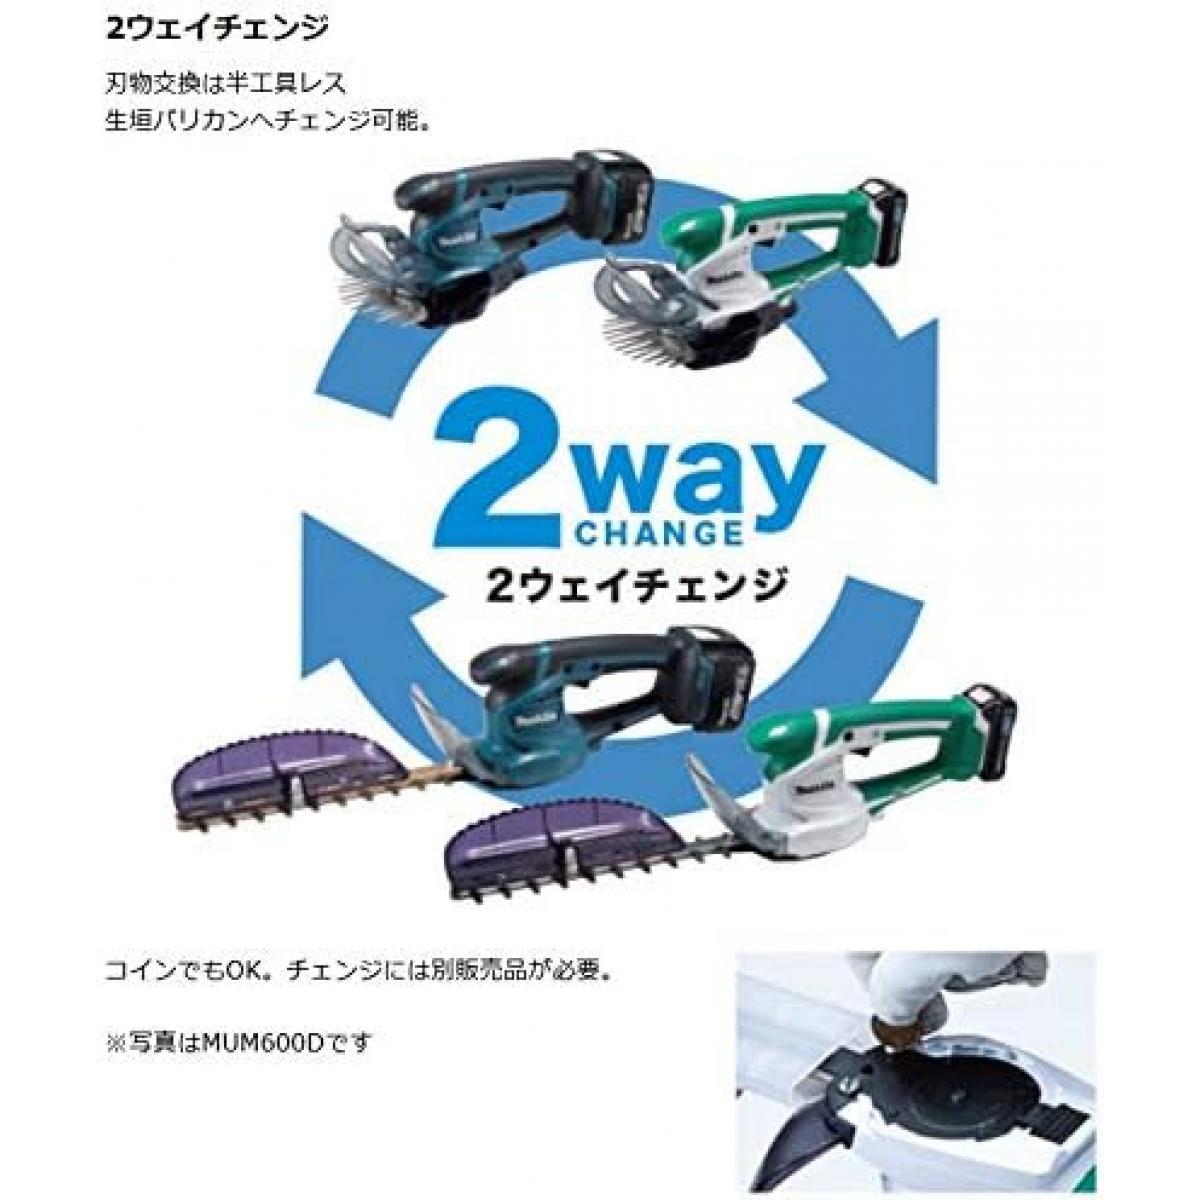 [ stock have * immediate payment ] Makita lawn grass raw barber's clippers barber's clippers lawn grass raw siba lawn grass ...si buffing barber's clippers rechargeable 18V. included width 160mm battery charger optional MUM604DZ